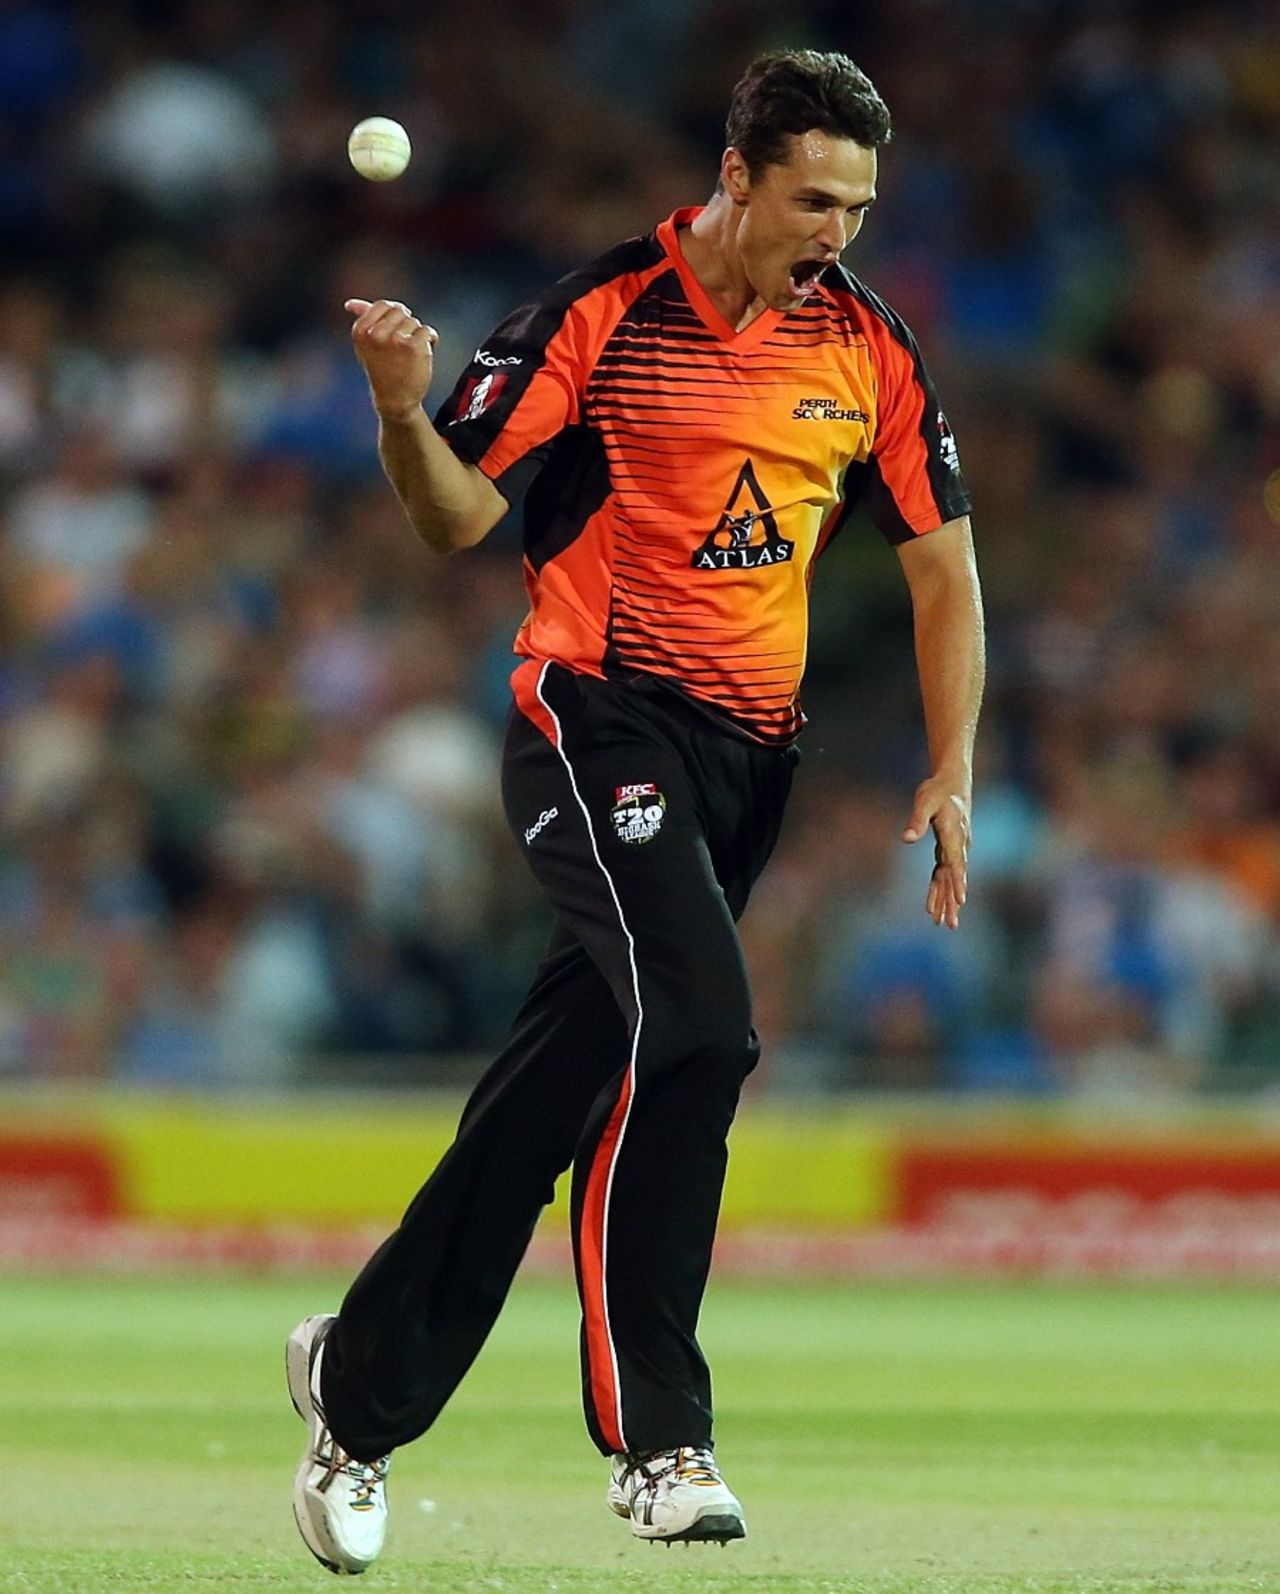 Nathan Coulter-Nile celebrates a wicket, Adelaide Strikers v Perth Scorchers, Big Bash League 2012-13, Adelaide, January 10, 2013